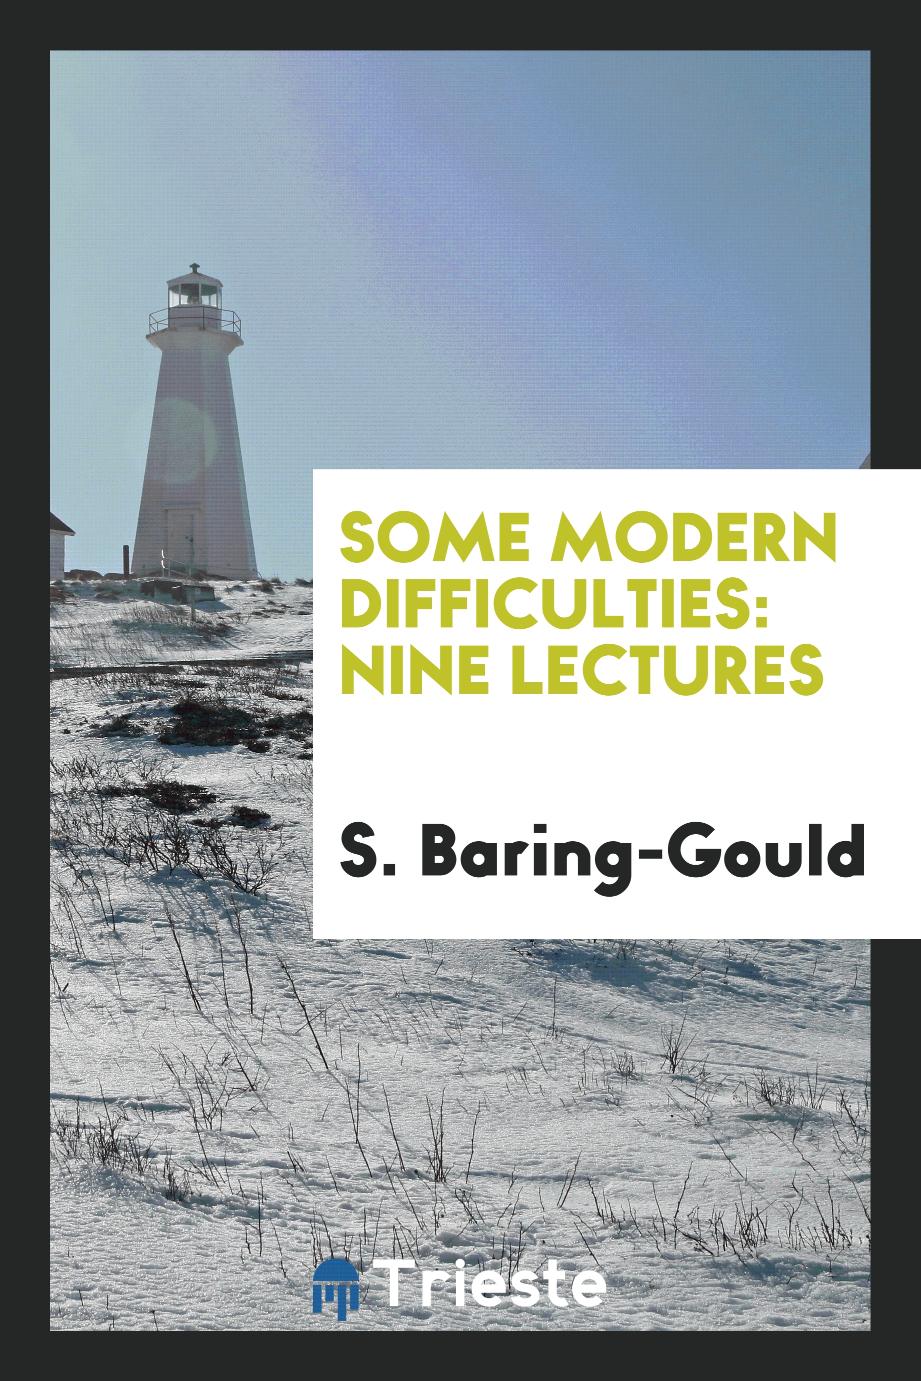 Some modern difficulties: nine lectures